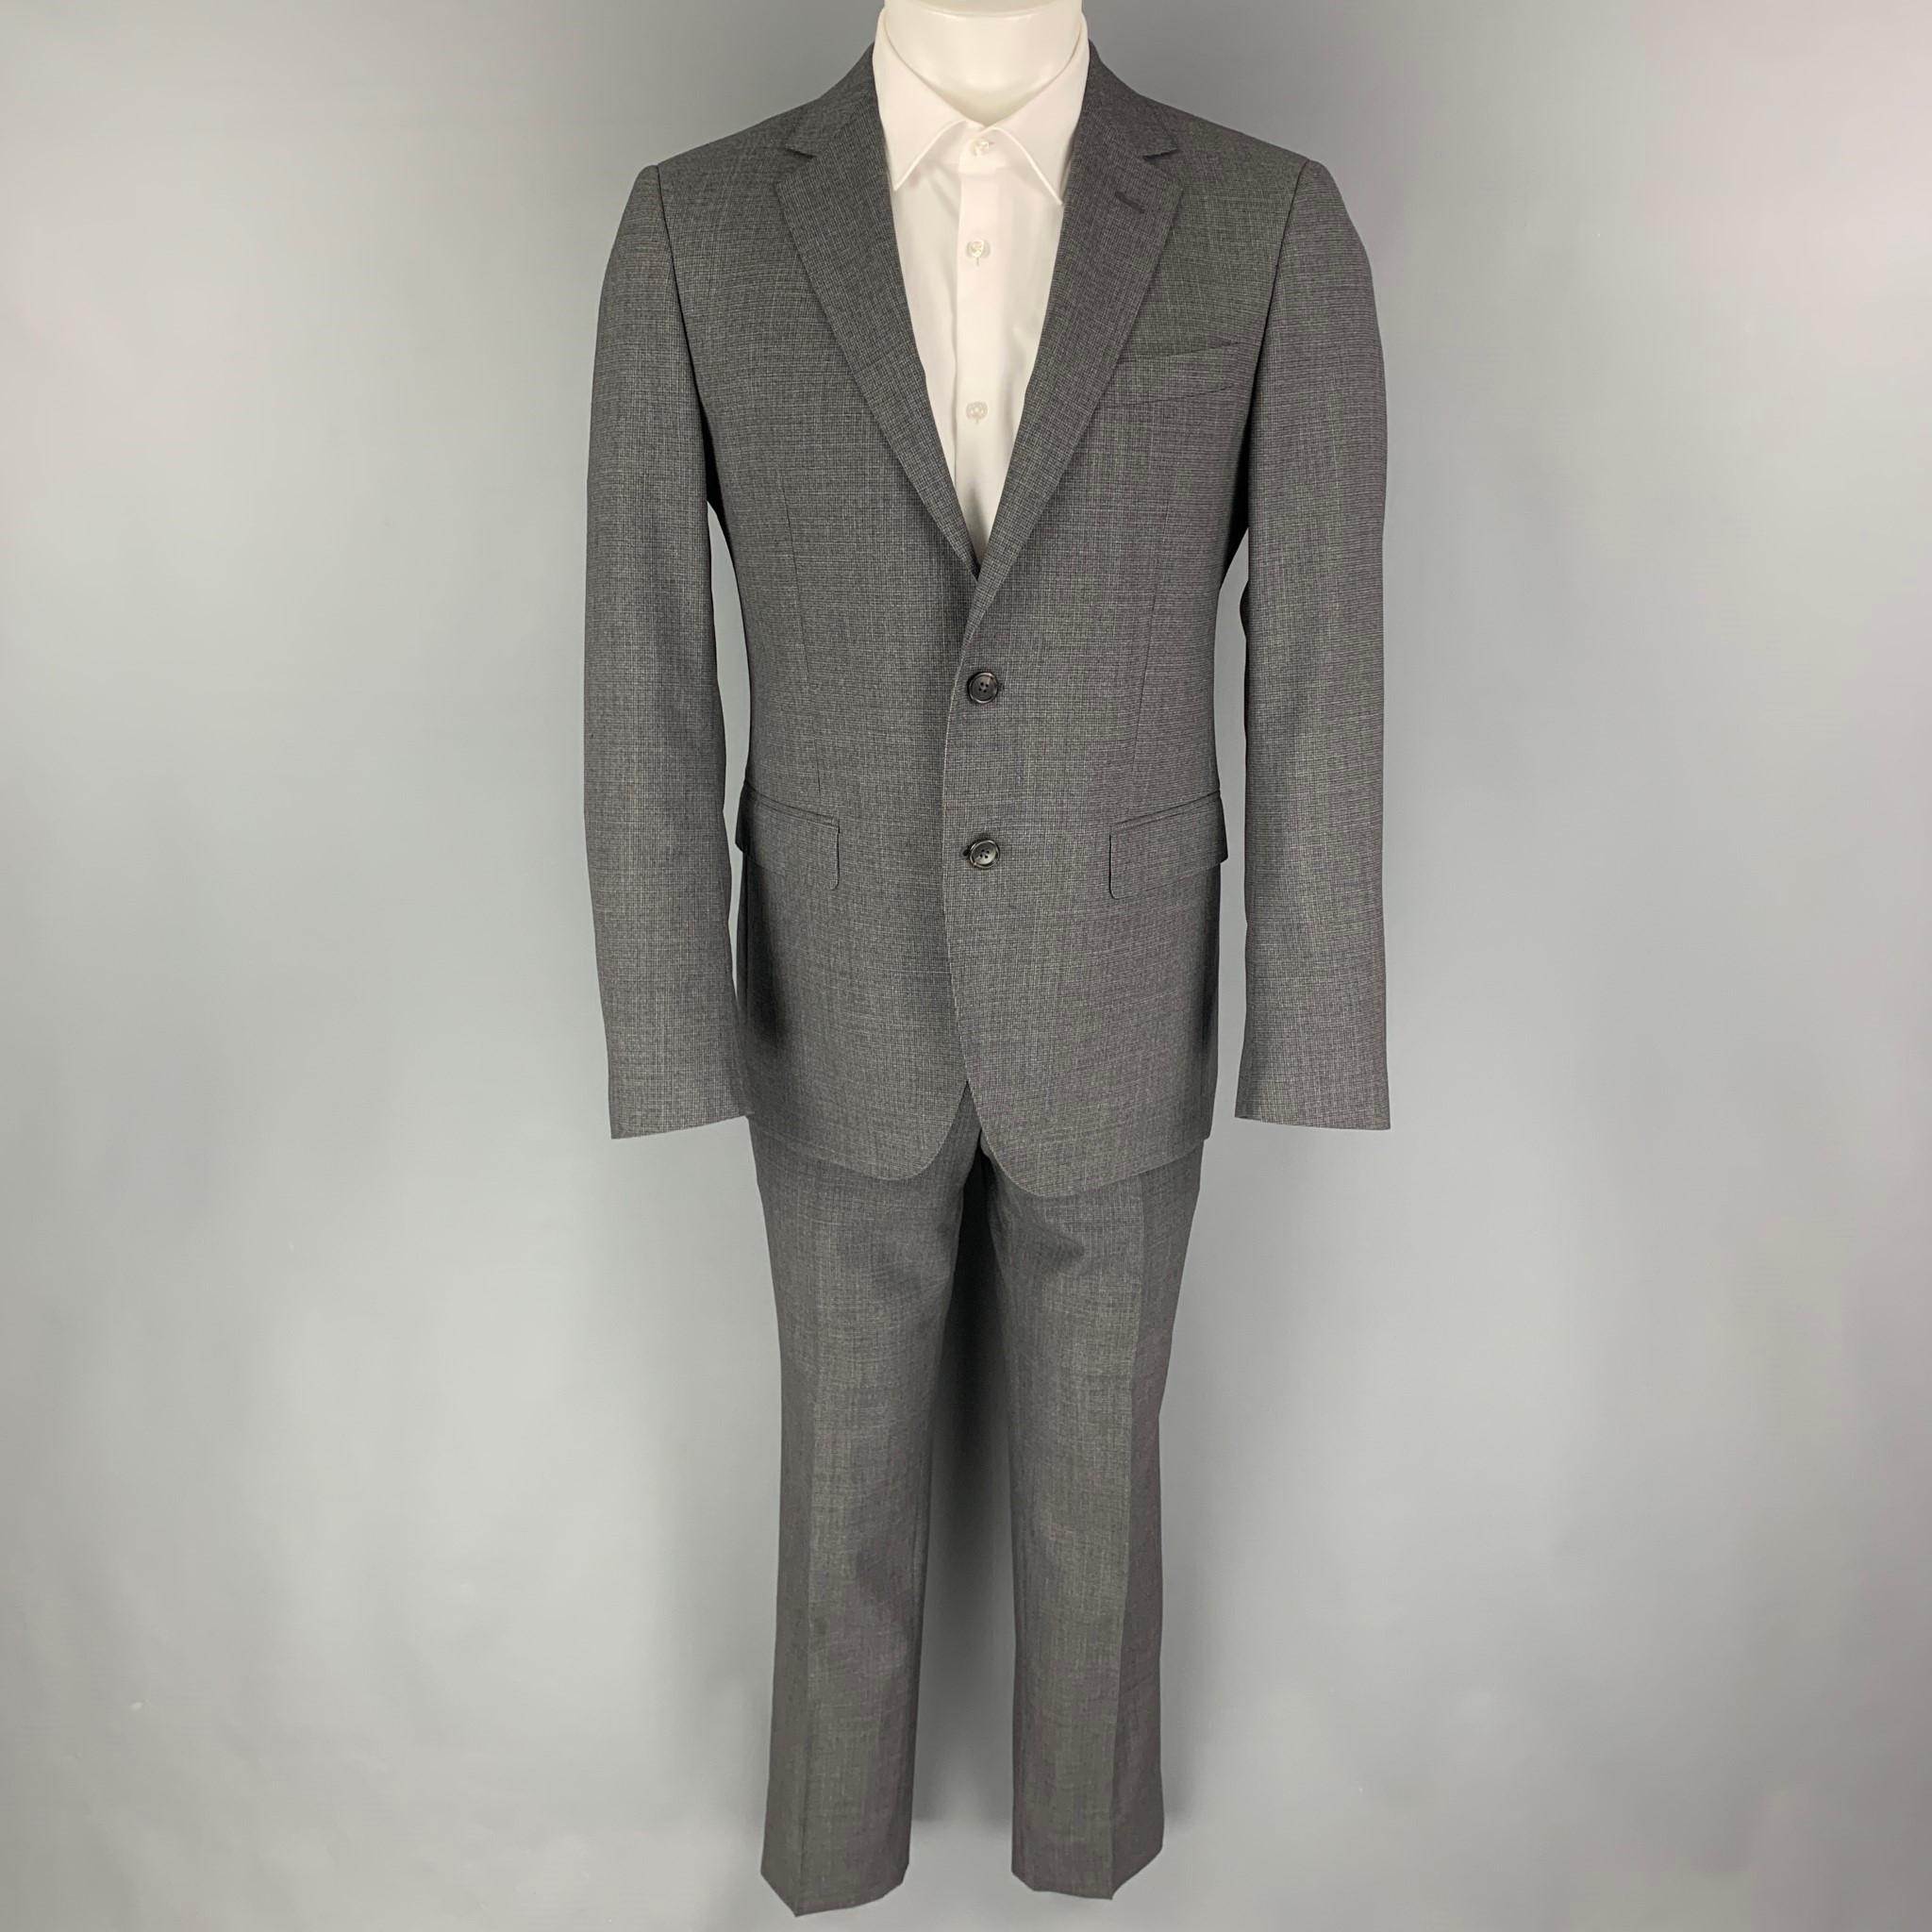 LANVIN suit comes in a grey grid wool with a full liner and includes a single breasted, double button sport coat with a notch lapel and matching flat front trousers.

Excellent Pre-Owned Condition.
Marked: 48

Measurements:

-Jacket
Shoulder: 17